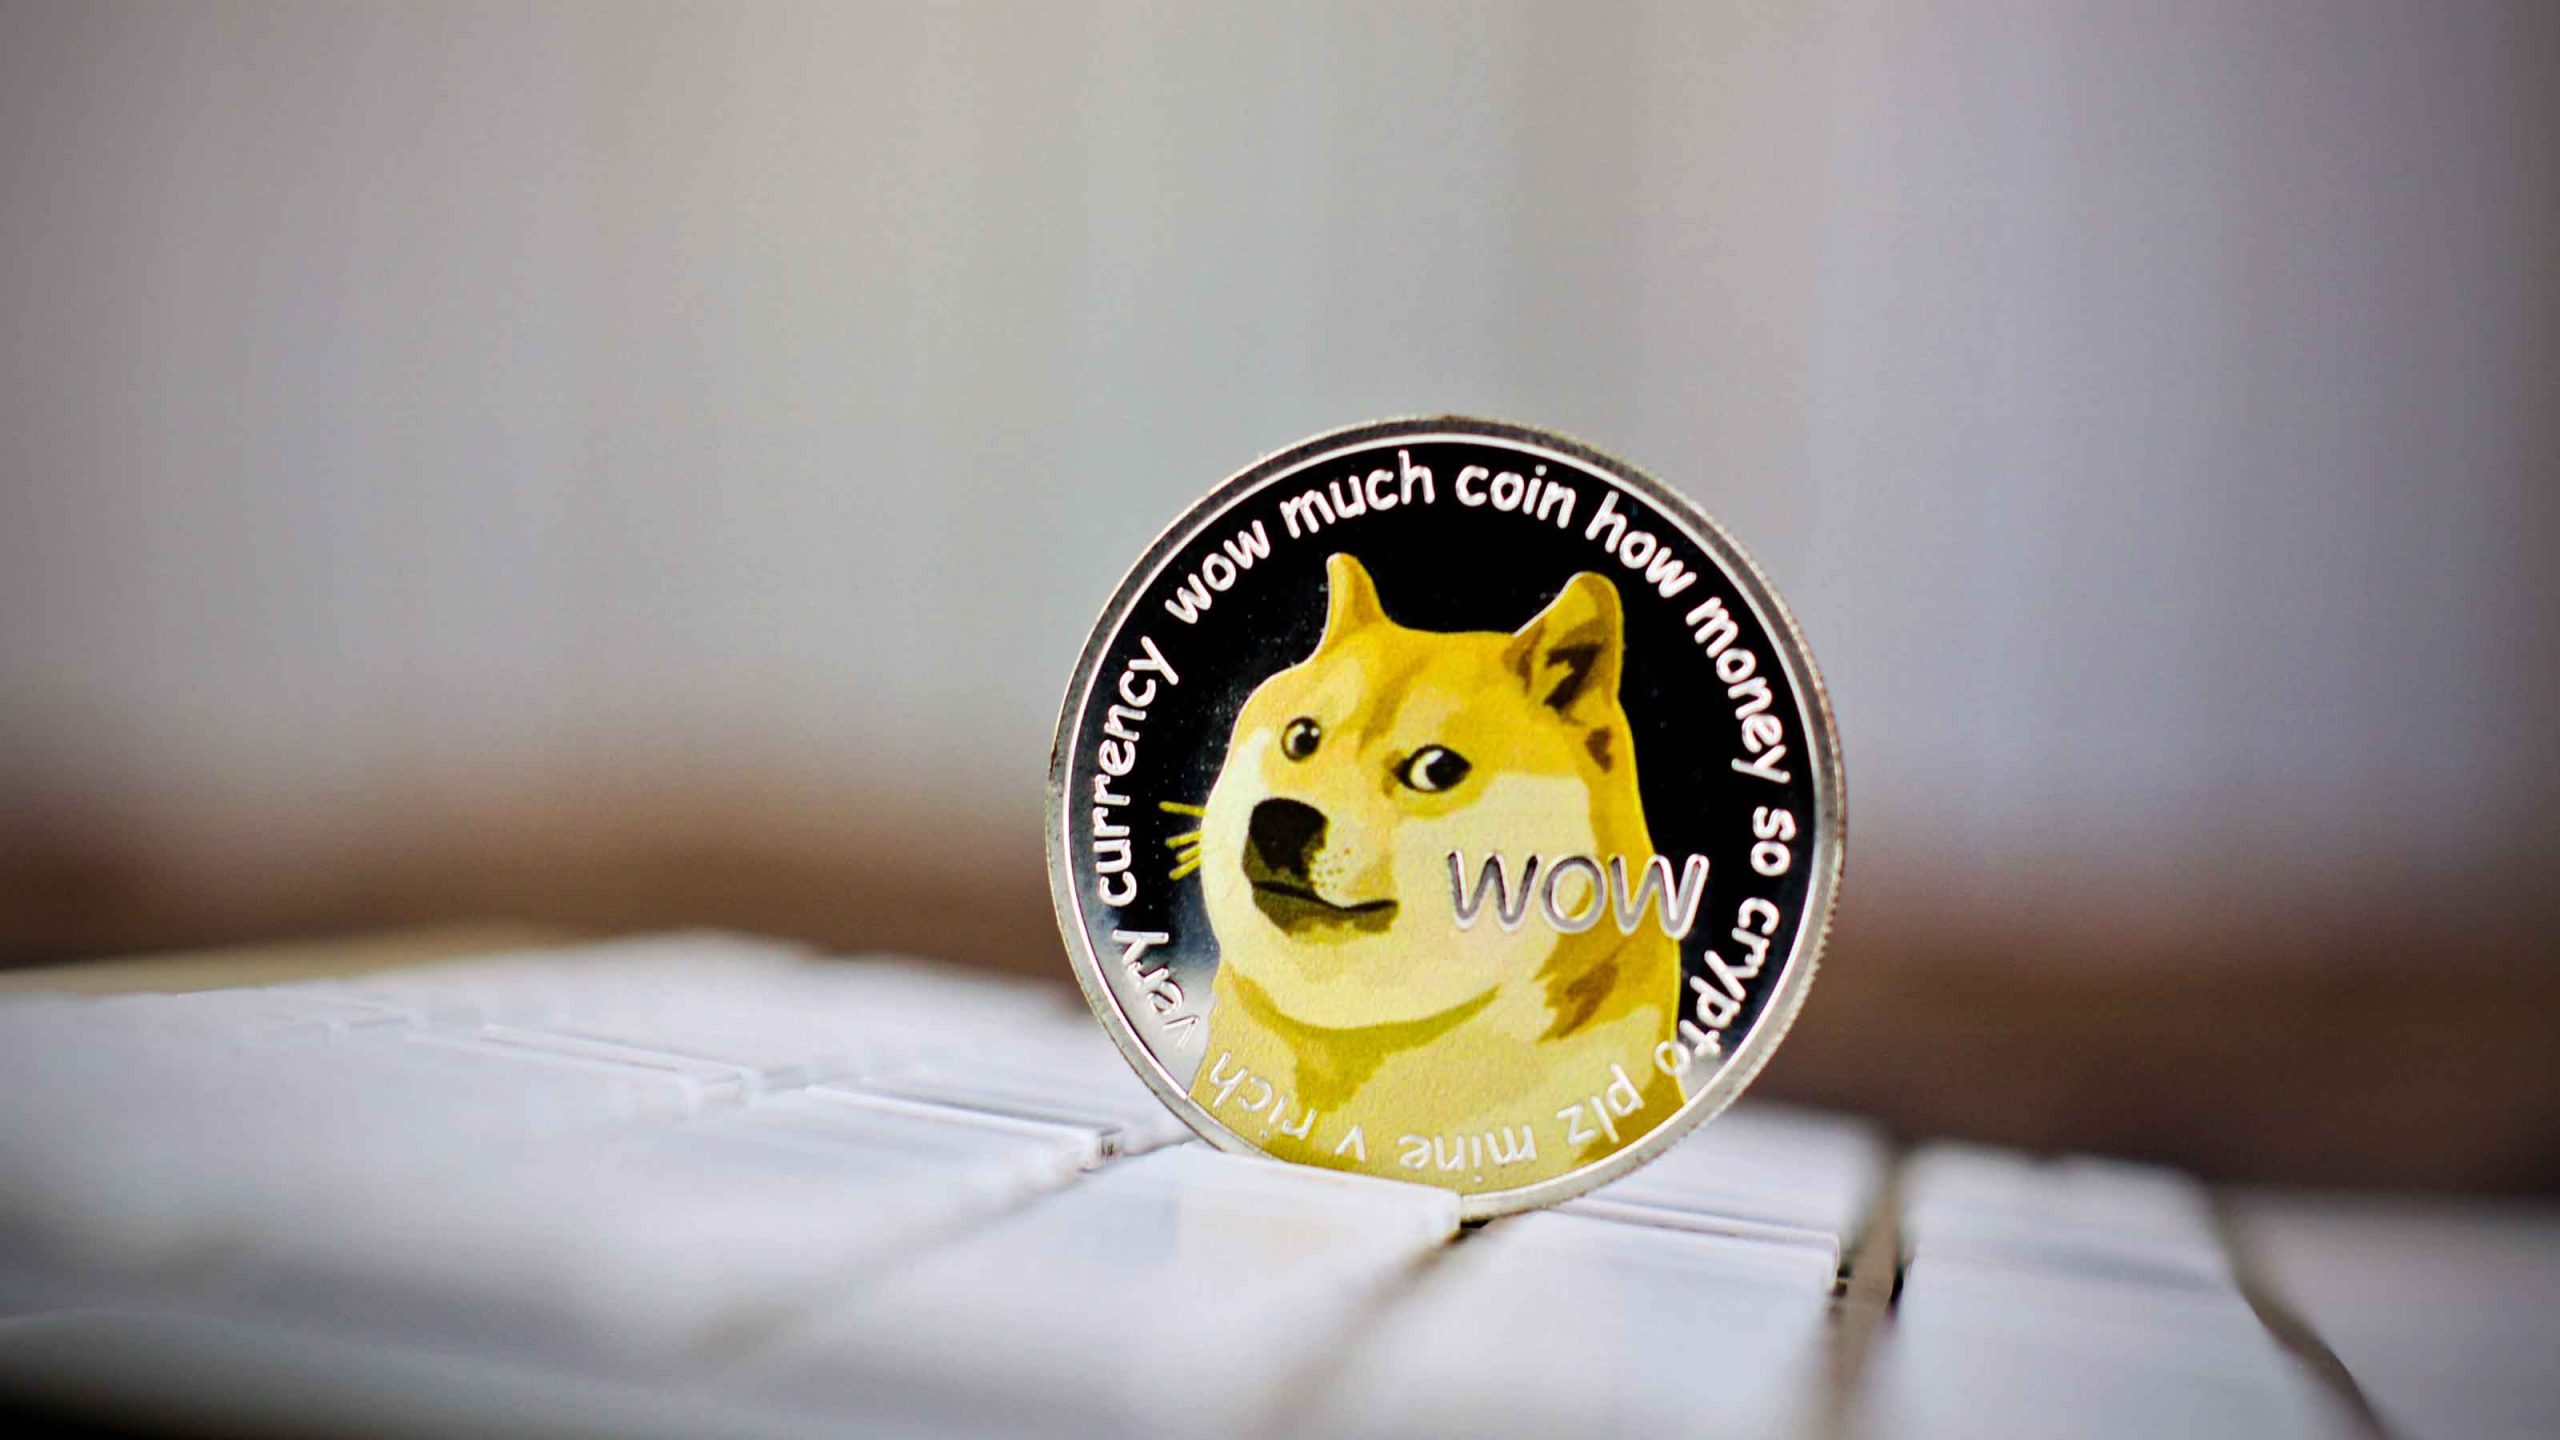 Where will Dogecoin be in 5 years?